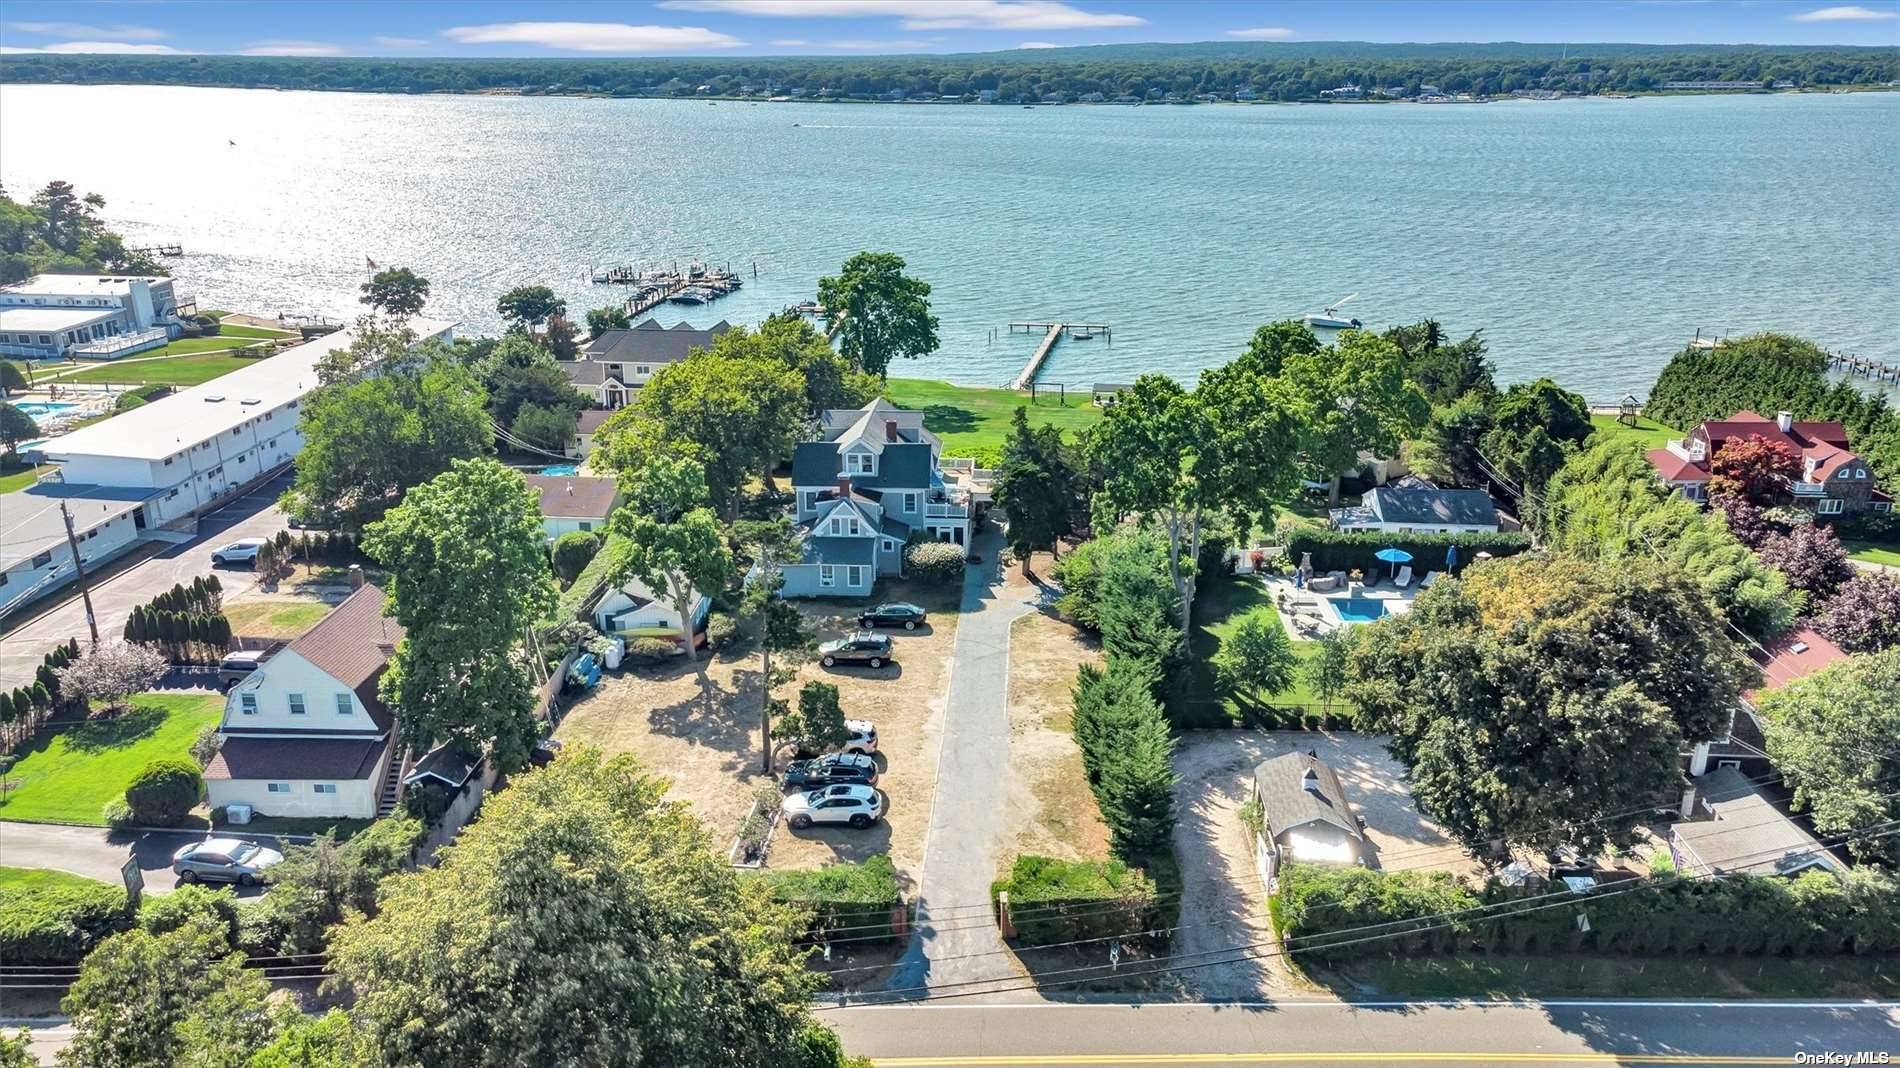 Enjoy bay front living in Hampton Bays from April to November.